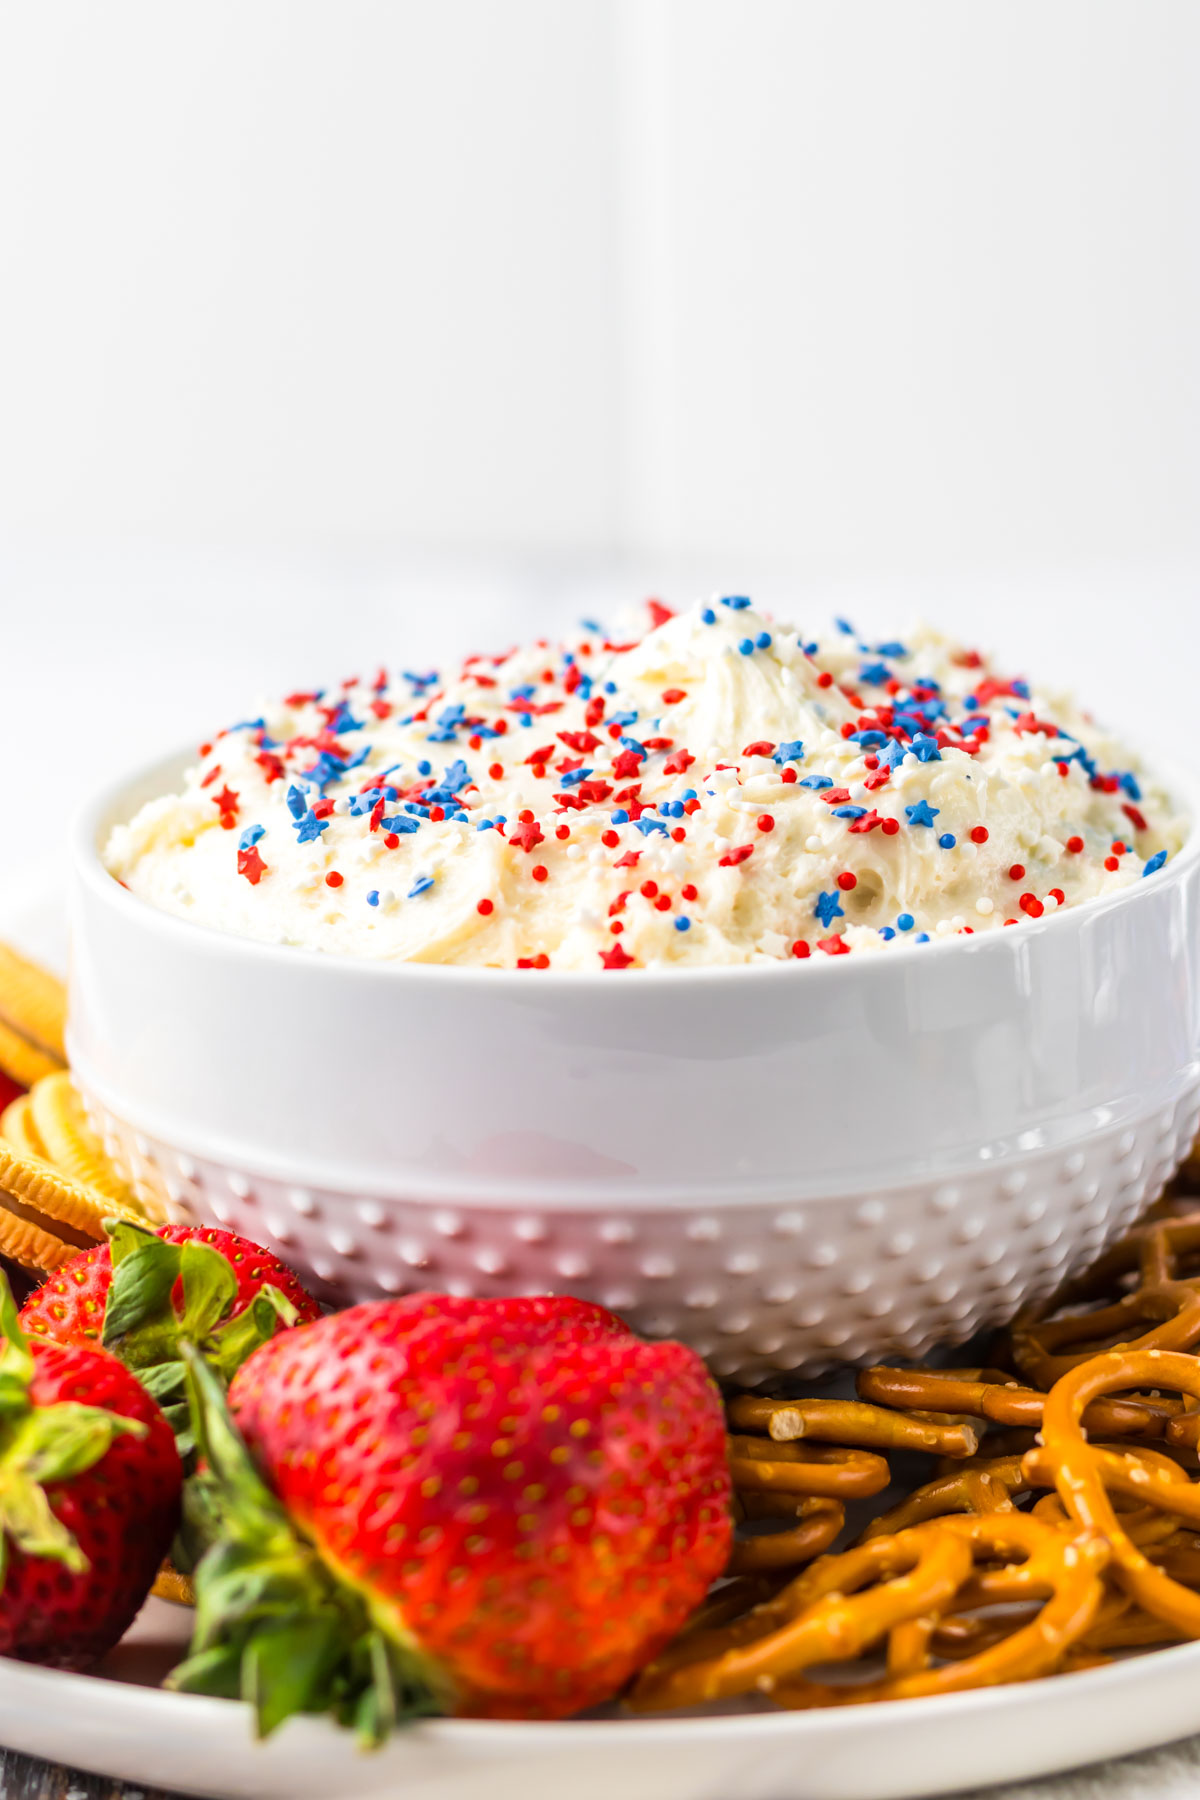 the finished funfetti dip recipe in a bowl on top of a serving platter with strawberries and preztel dippers.